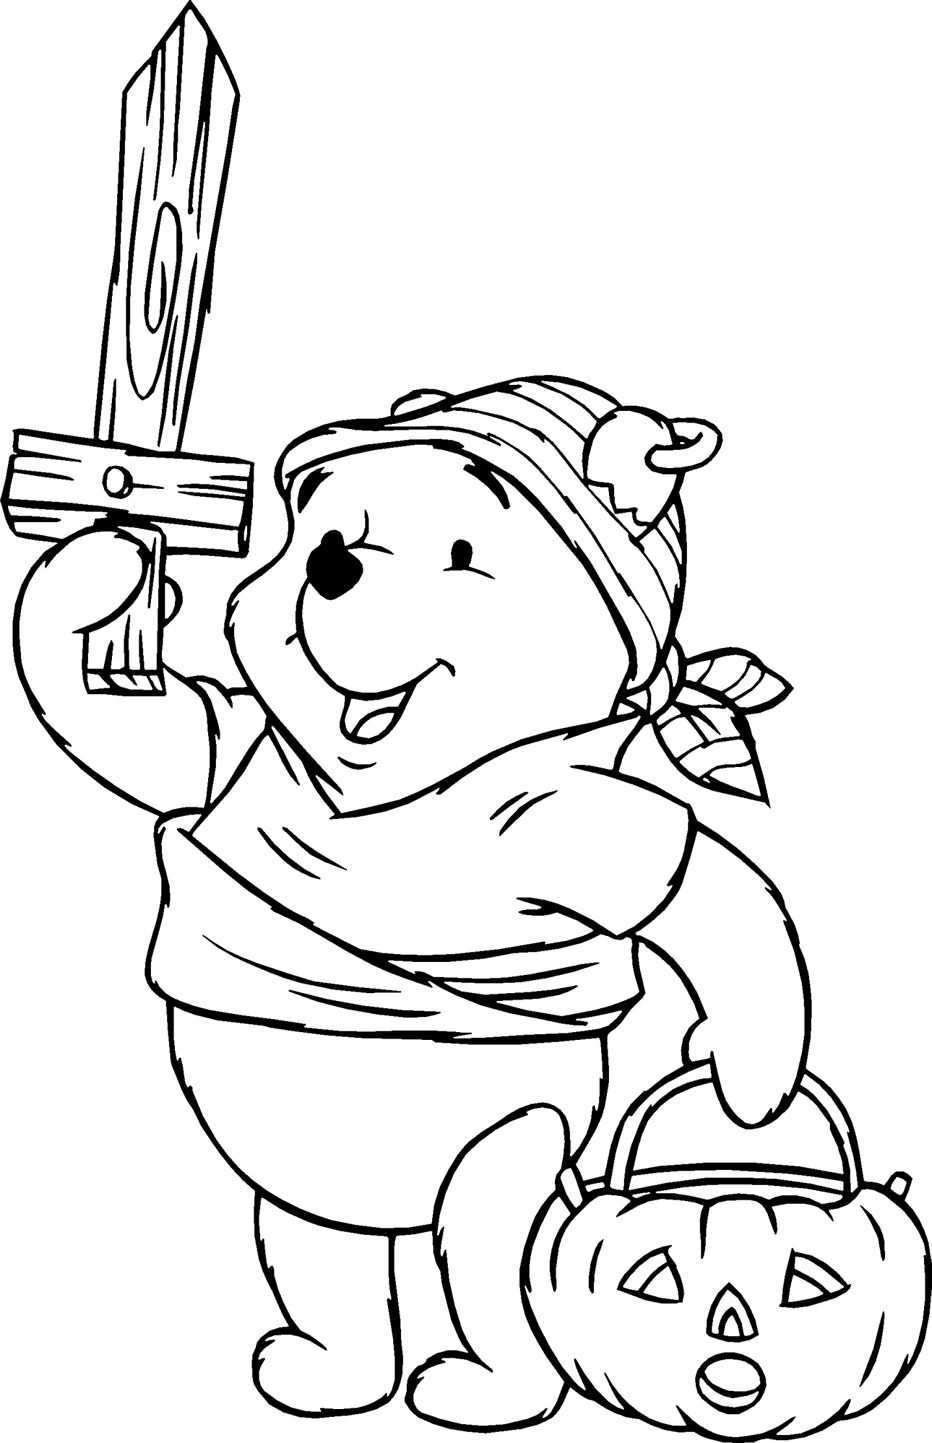 Halloween Free Halloween Coloring Pages Disney Coloring Pages Disney Halloween Colori